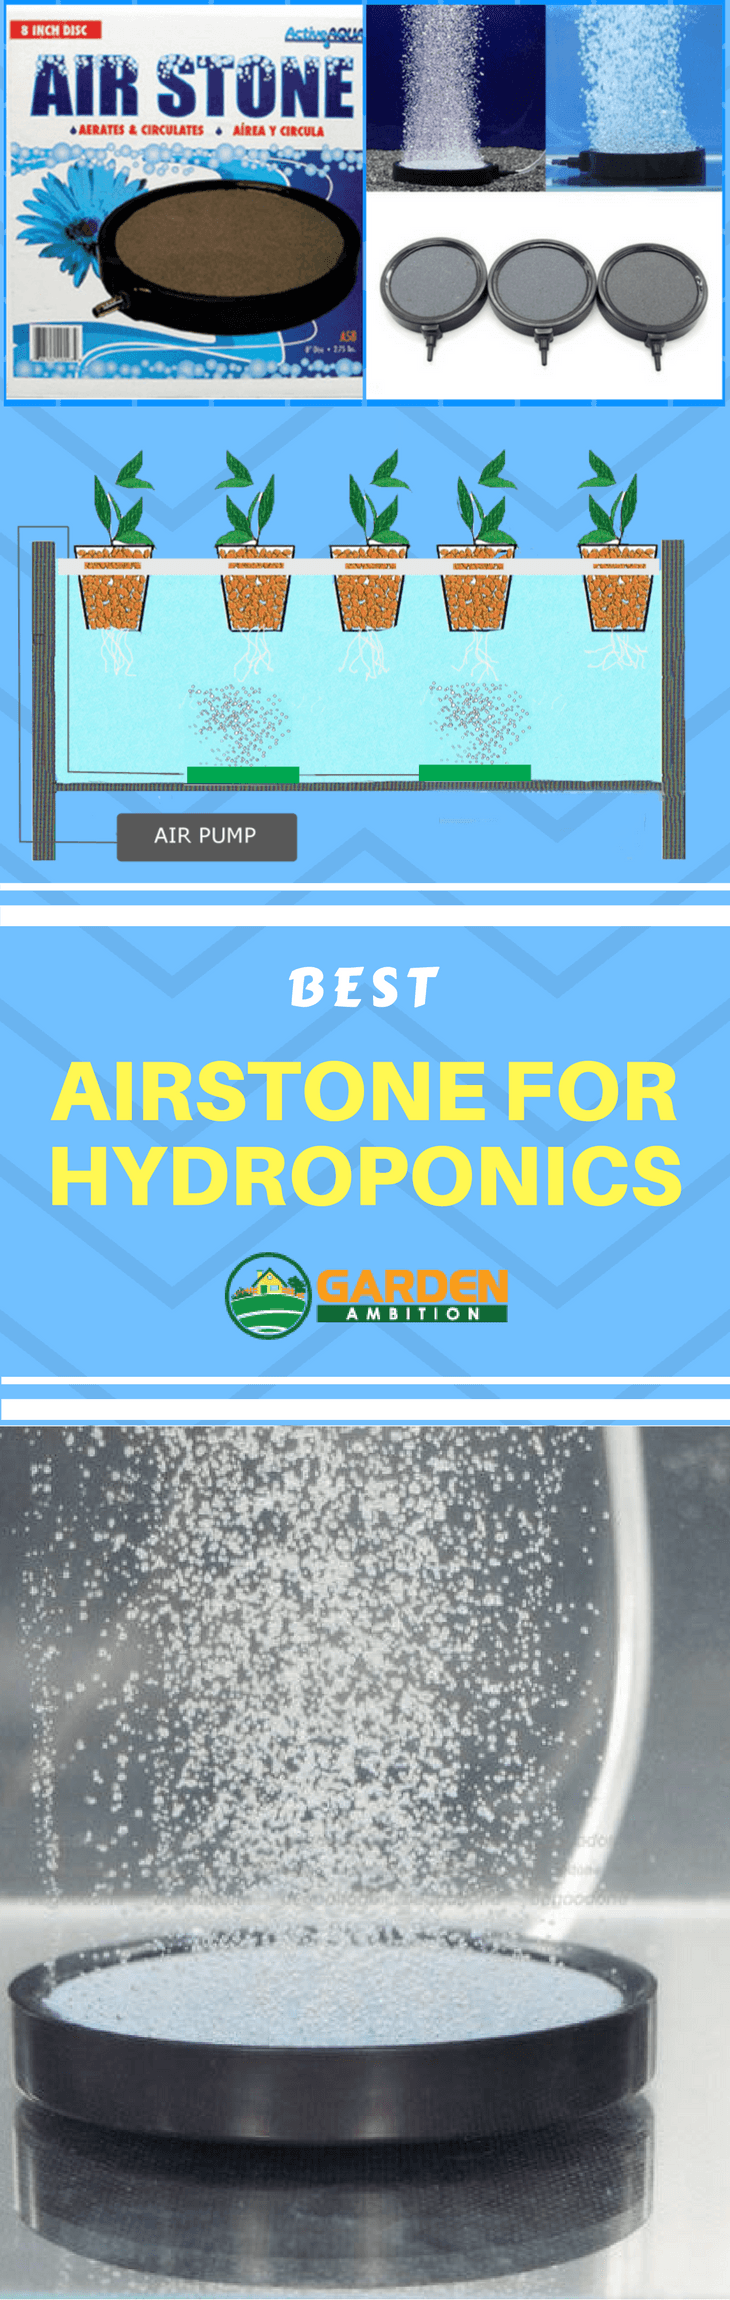 best airstone for hydroponics infographic